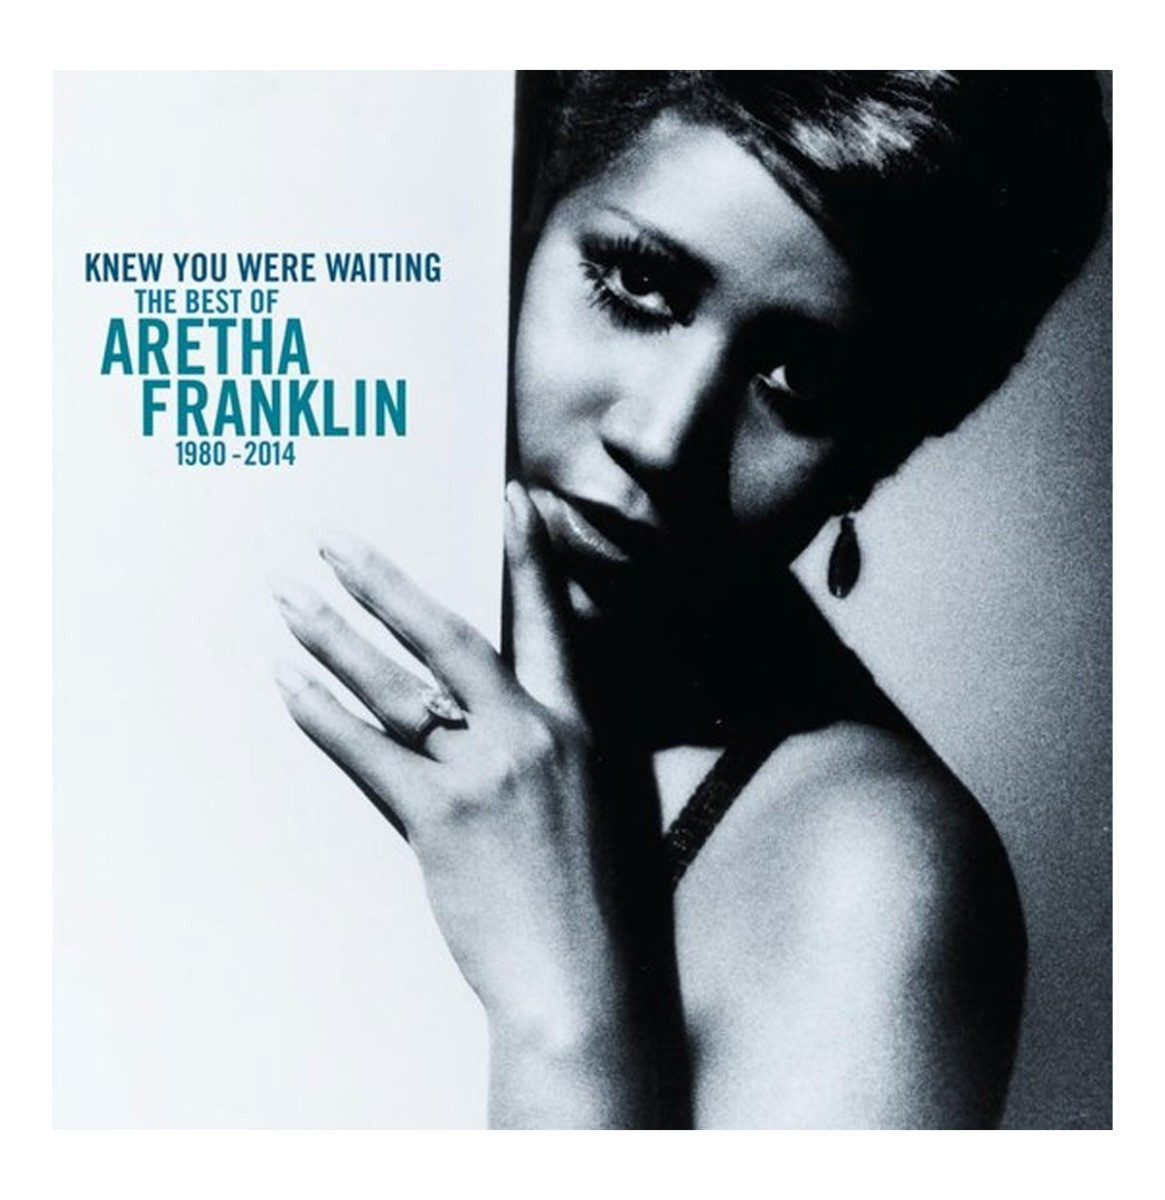 Aretha Franklin - I Knew You Were Waiting: The Best Of Aretha Franklin 1980-2014 2-LP